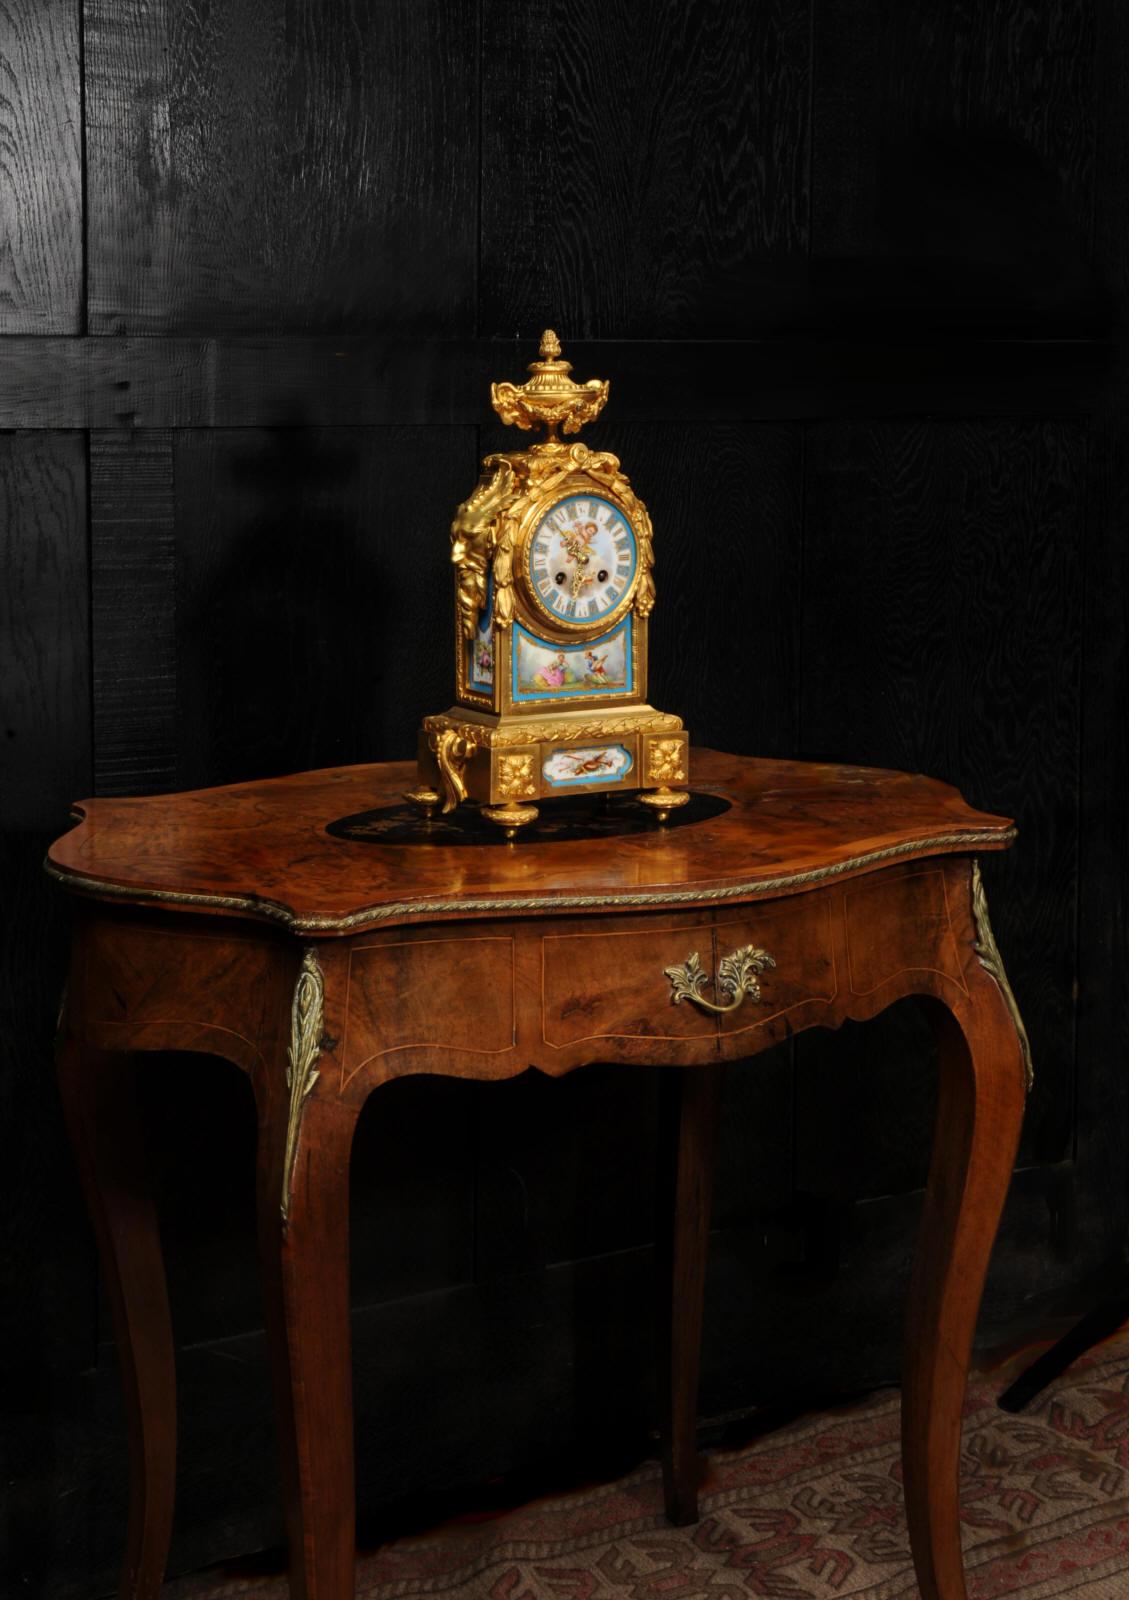 Early Ormolu and Sevres Porcelain Antique French Clock - Japy Fils Fully Working For Sale 6